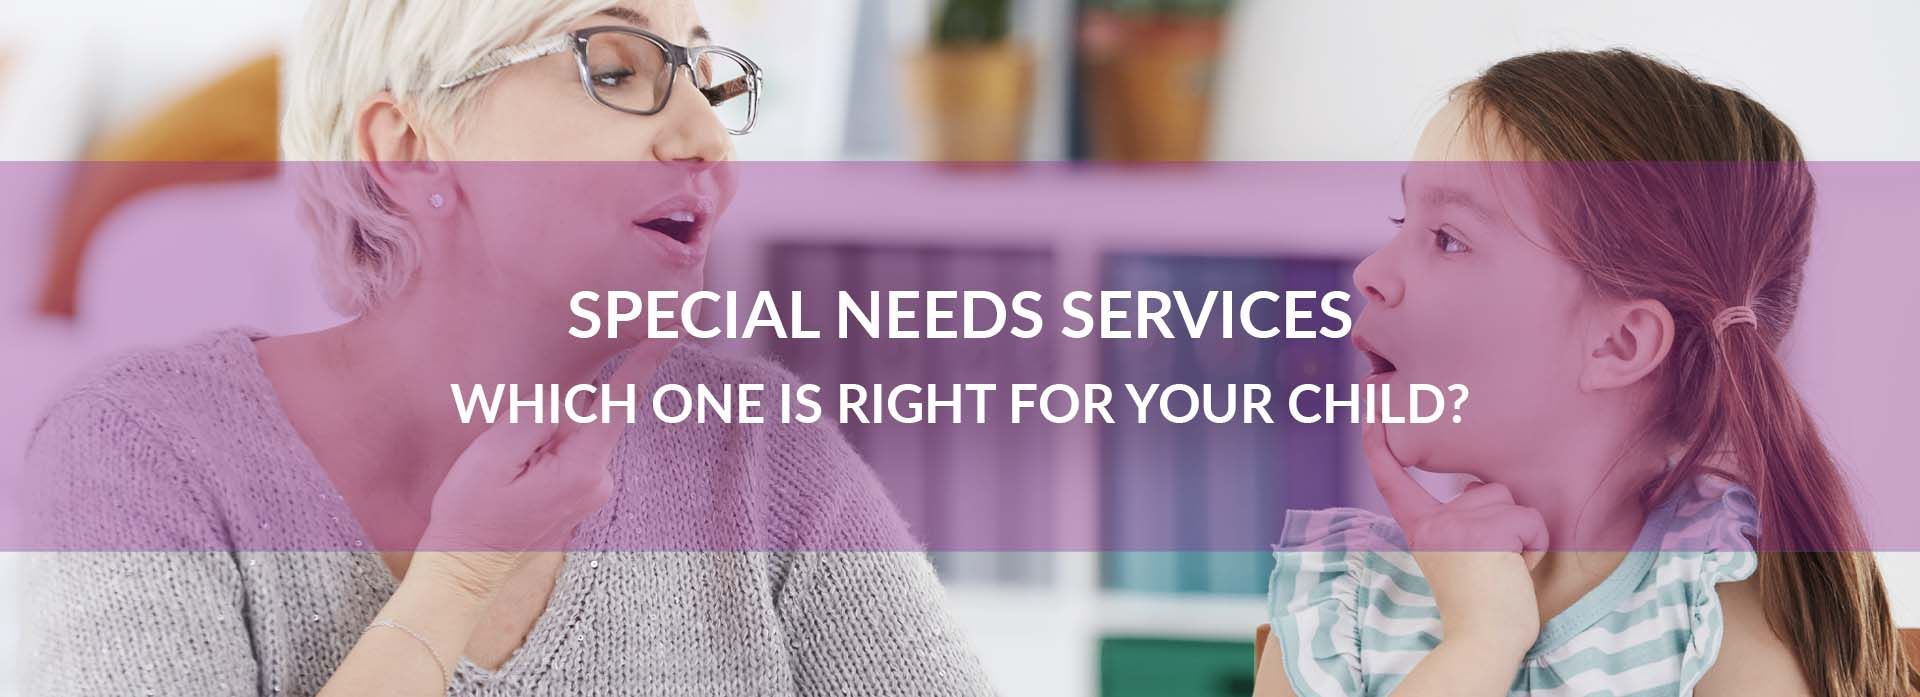 Special Needs Services - Which One Is Right For Your Child?